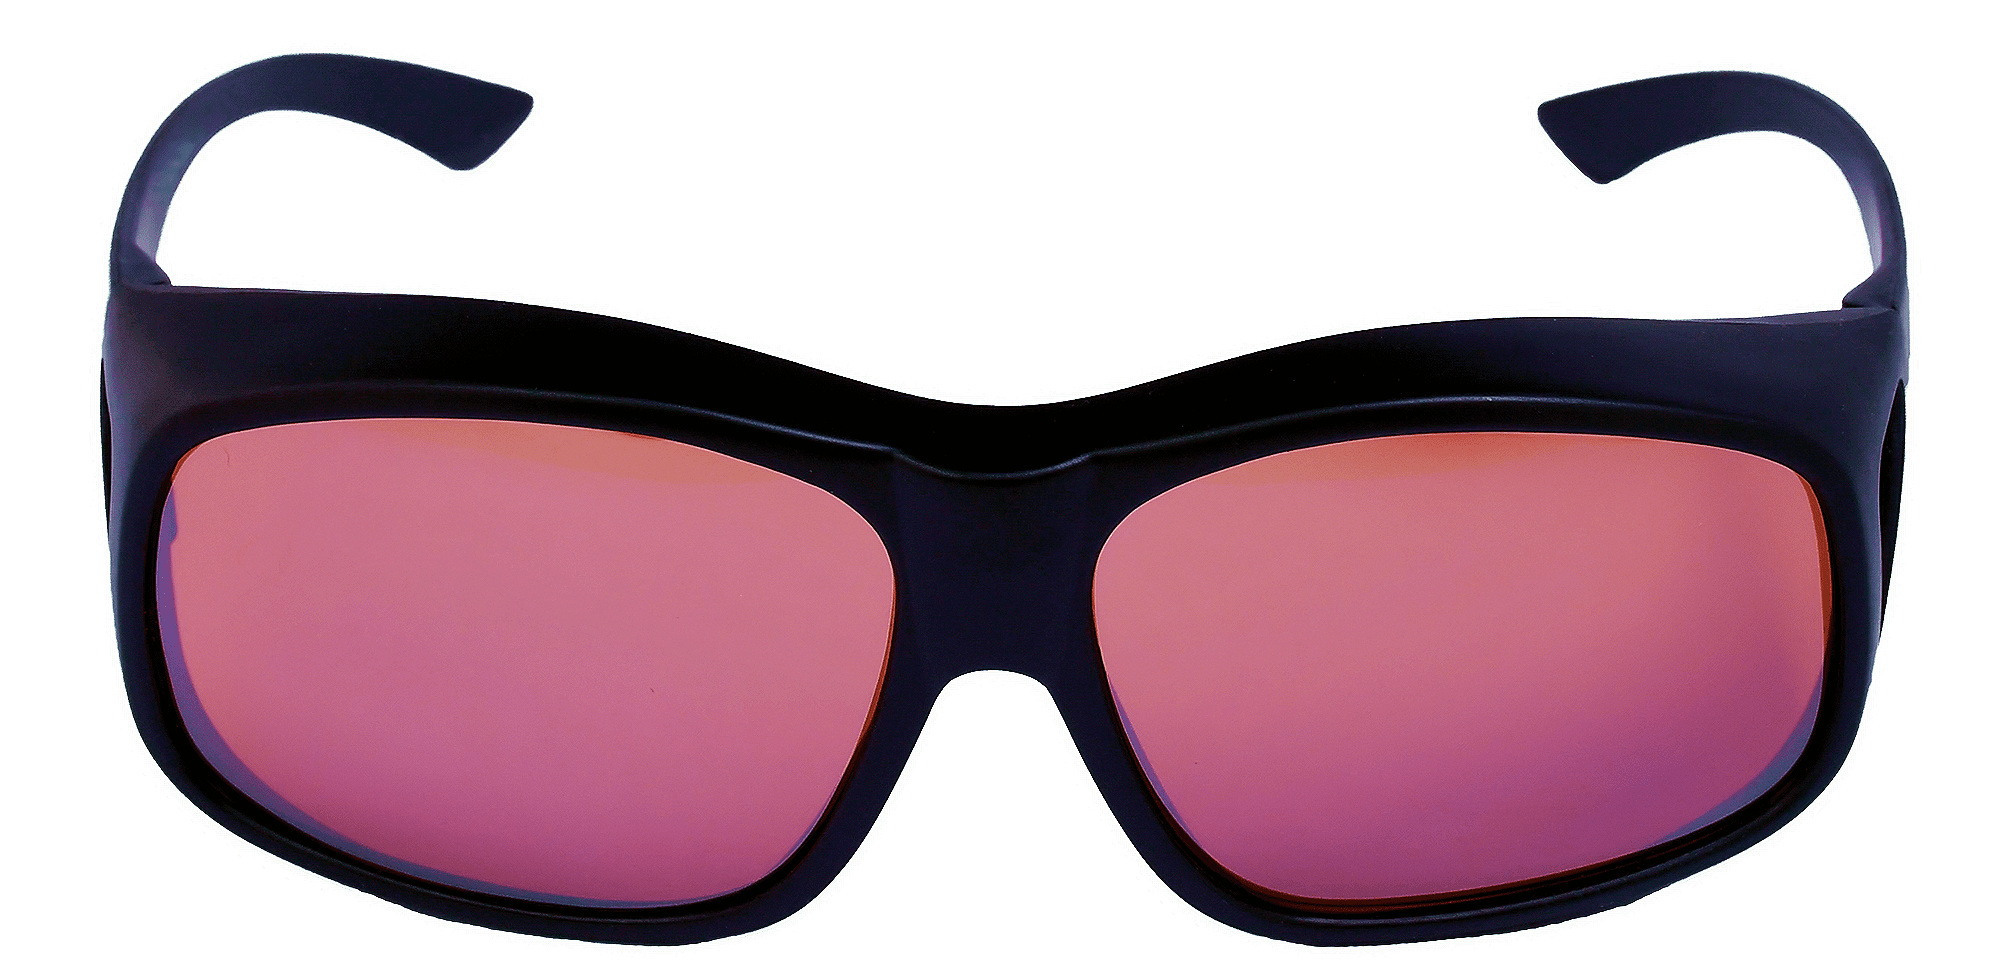 Large Will Fit Over Most Rx Sunglasses Shield Glasses Blue Block Amber 83BB